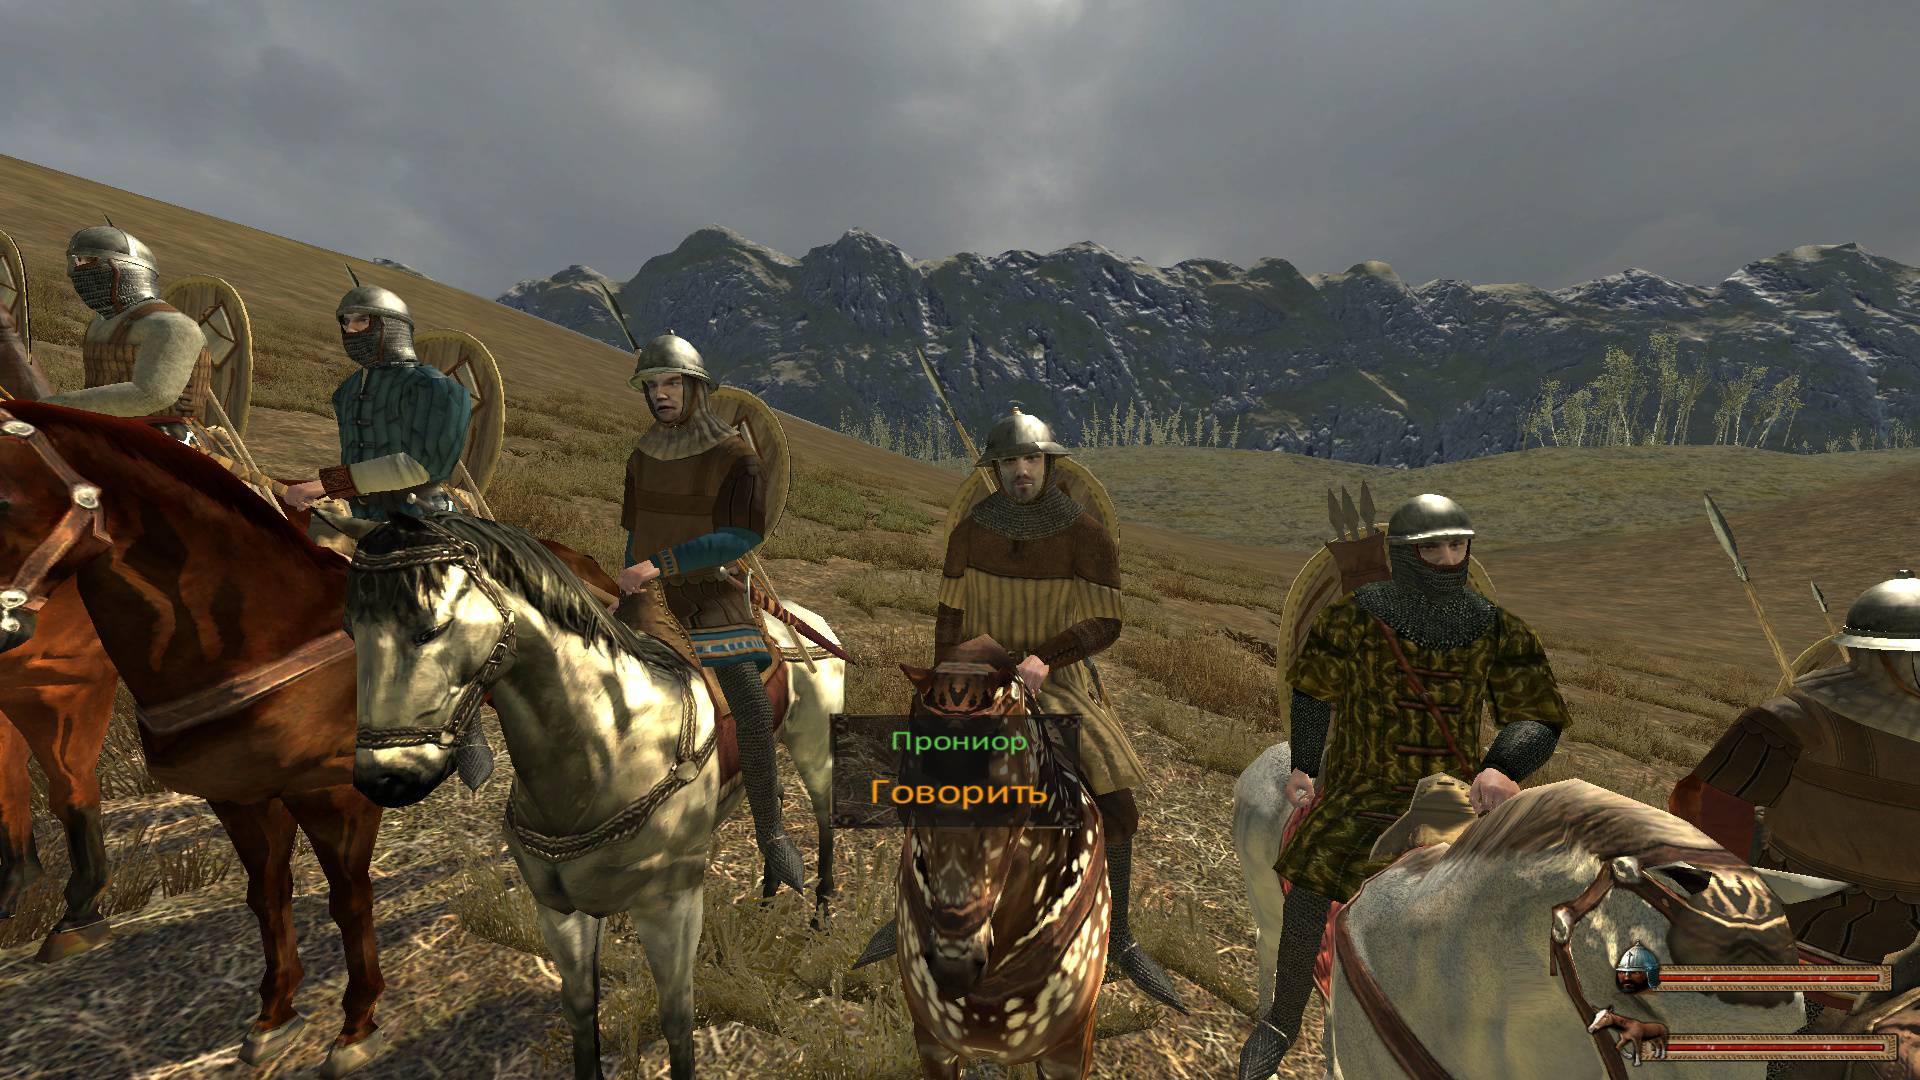 Warband Medieval Conquest. Medieval Conquest Mount Blade Warband. Мод для варбанд Medieval Conquest. Medieval Conquest русификатор.